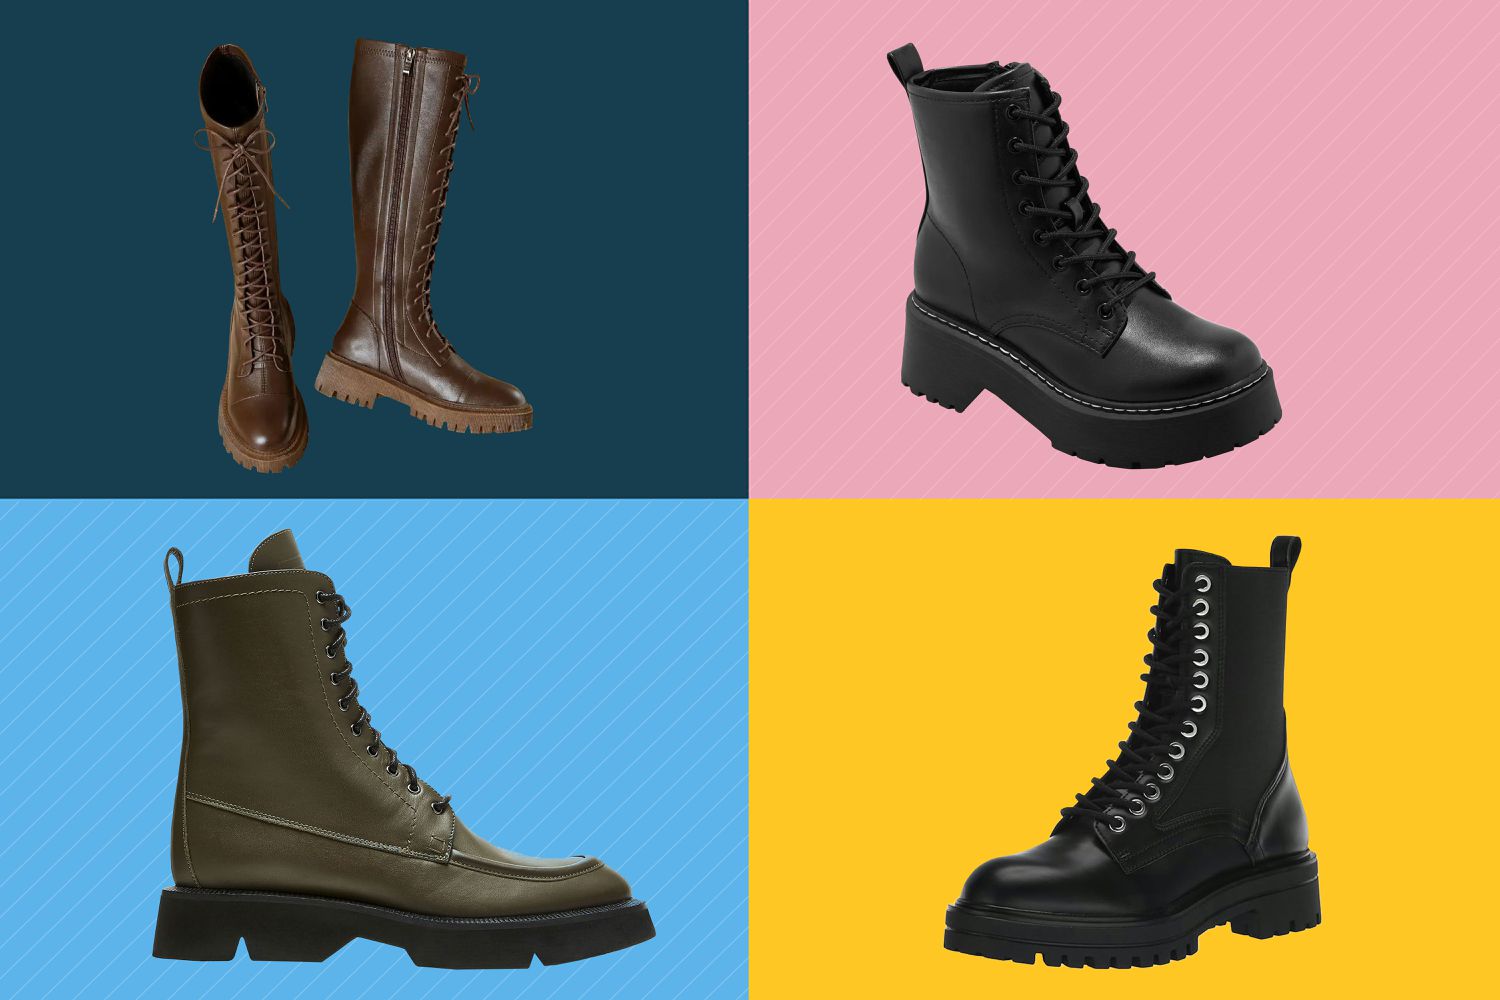 Four pairs of Combat Boots arranged on a colorful background